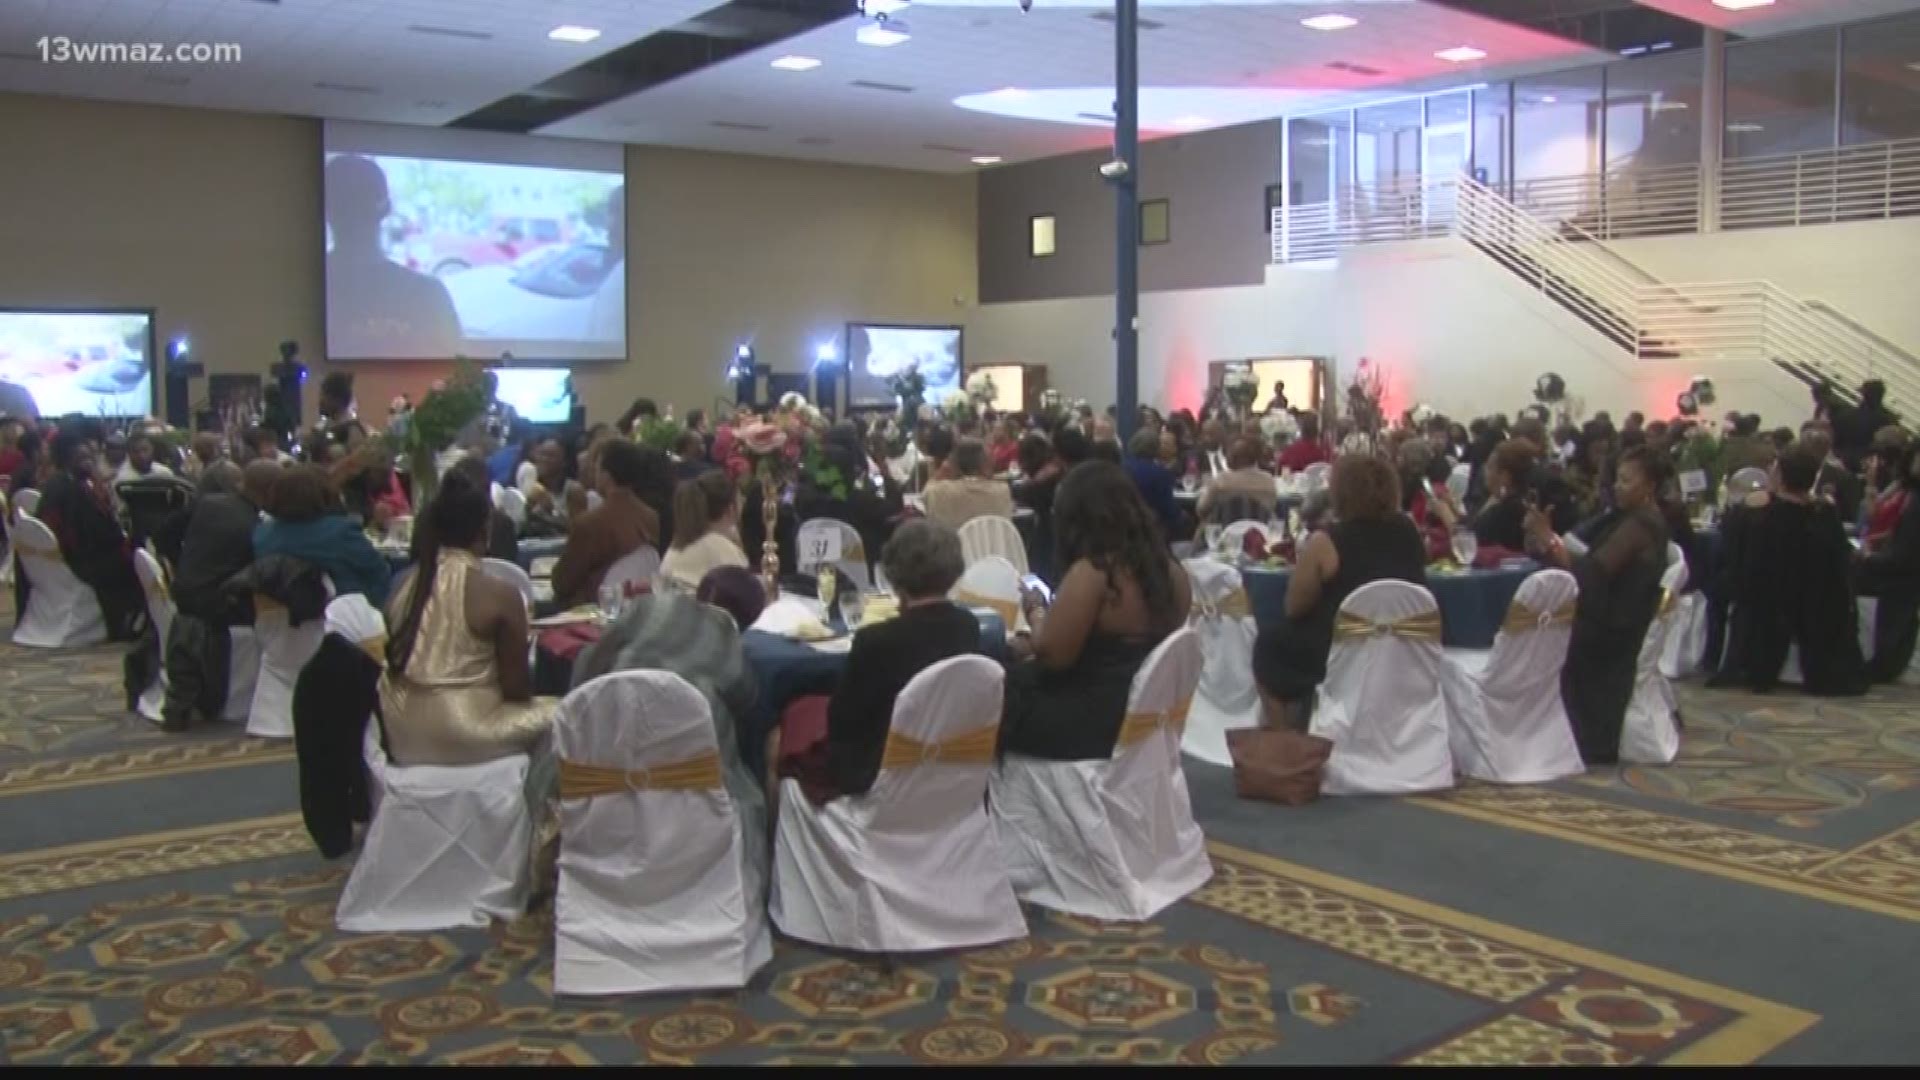 On Saturday night, hundreds of people attended the 9th annual Joshua's Birthday Bash Celebration to honor childhood cancer survivors and raise money for research.